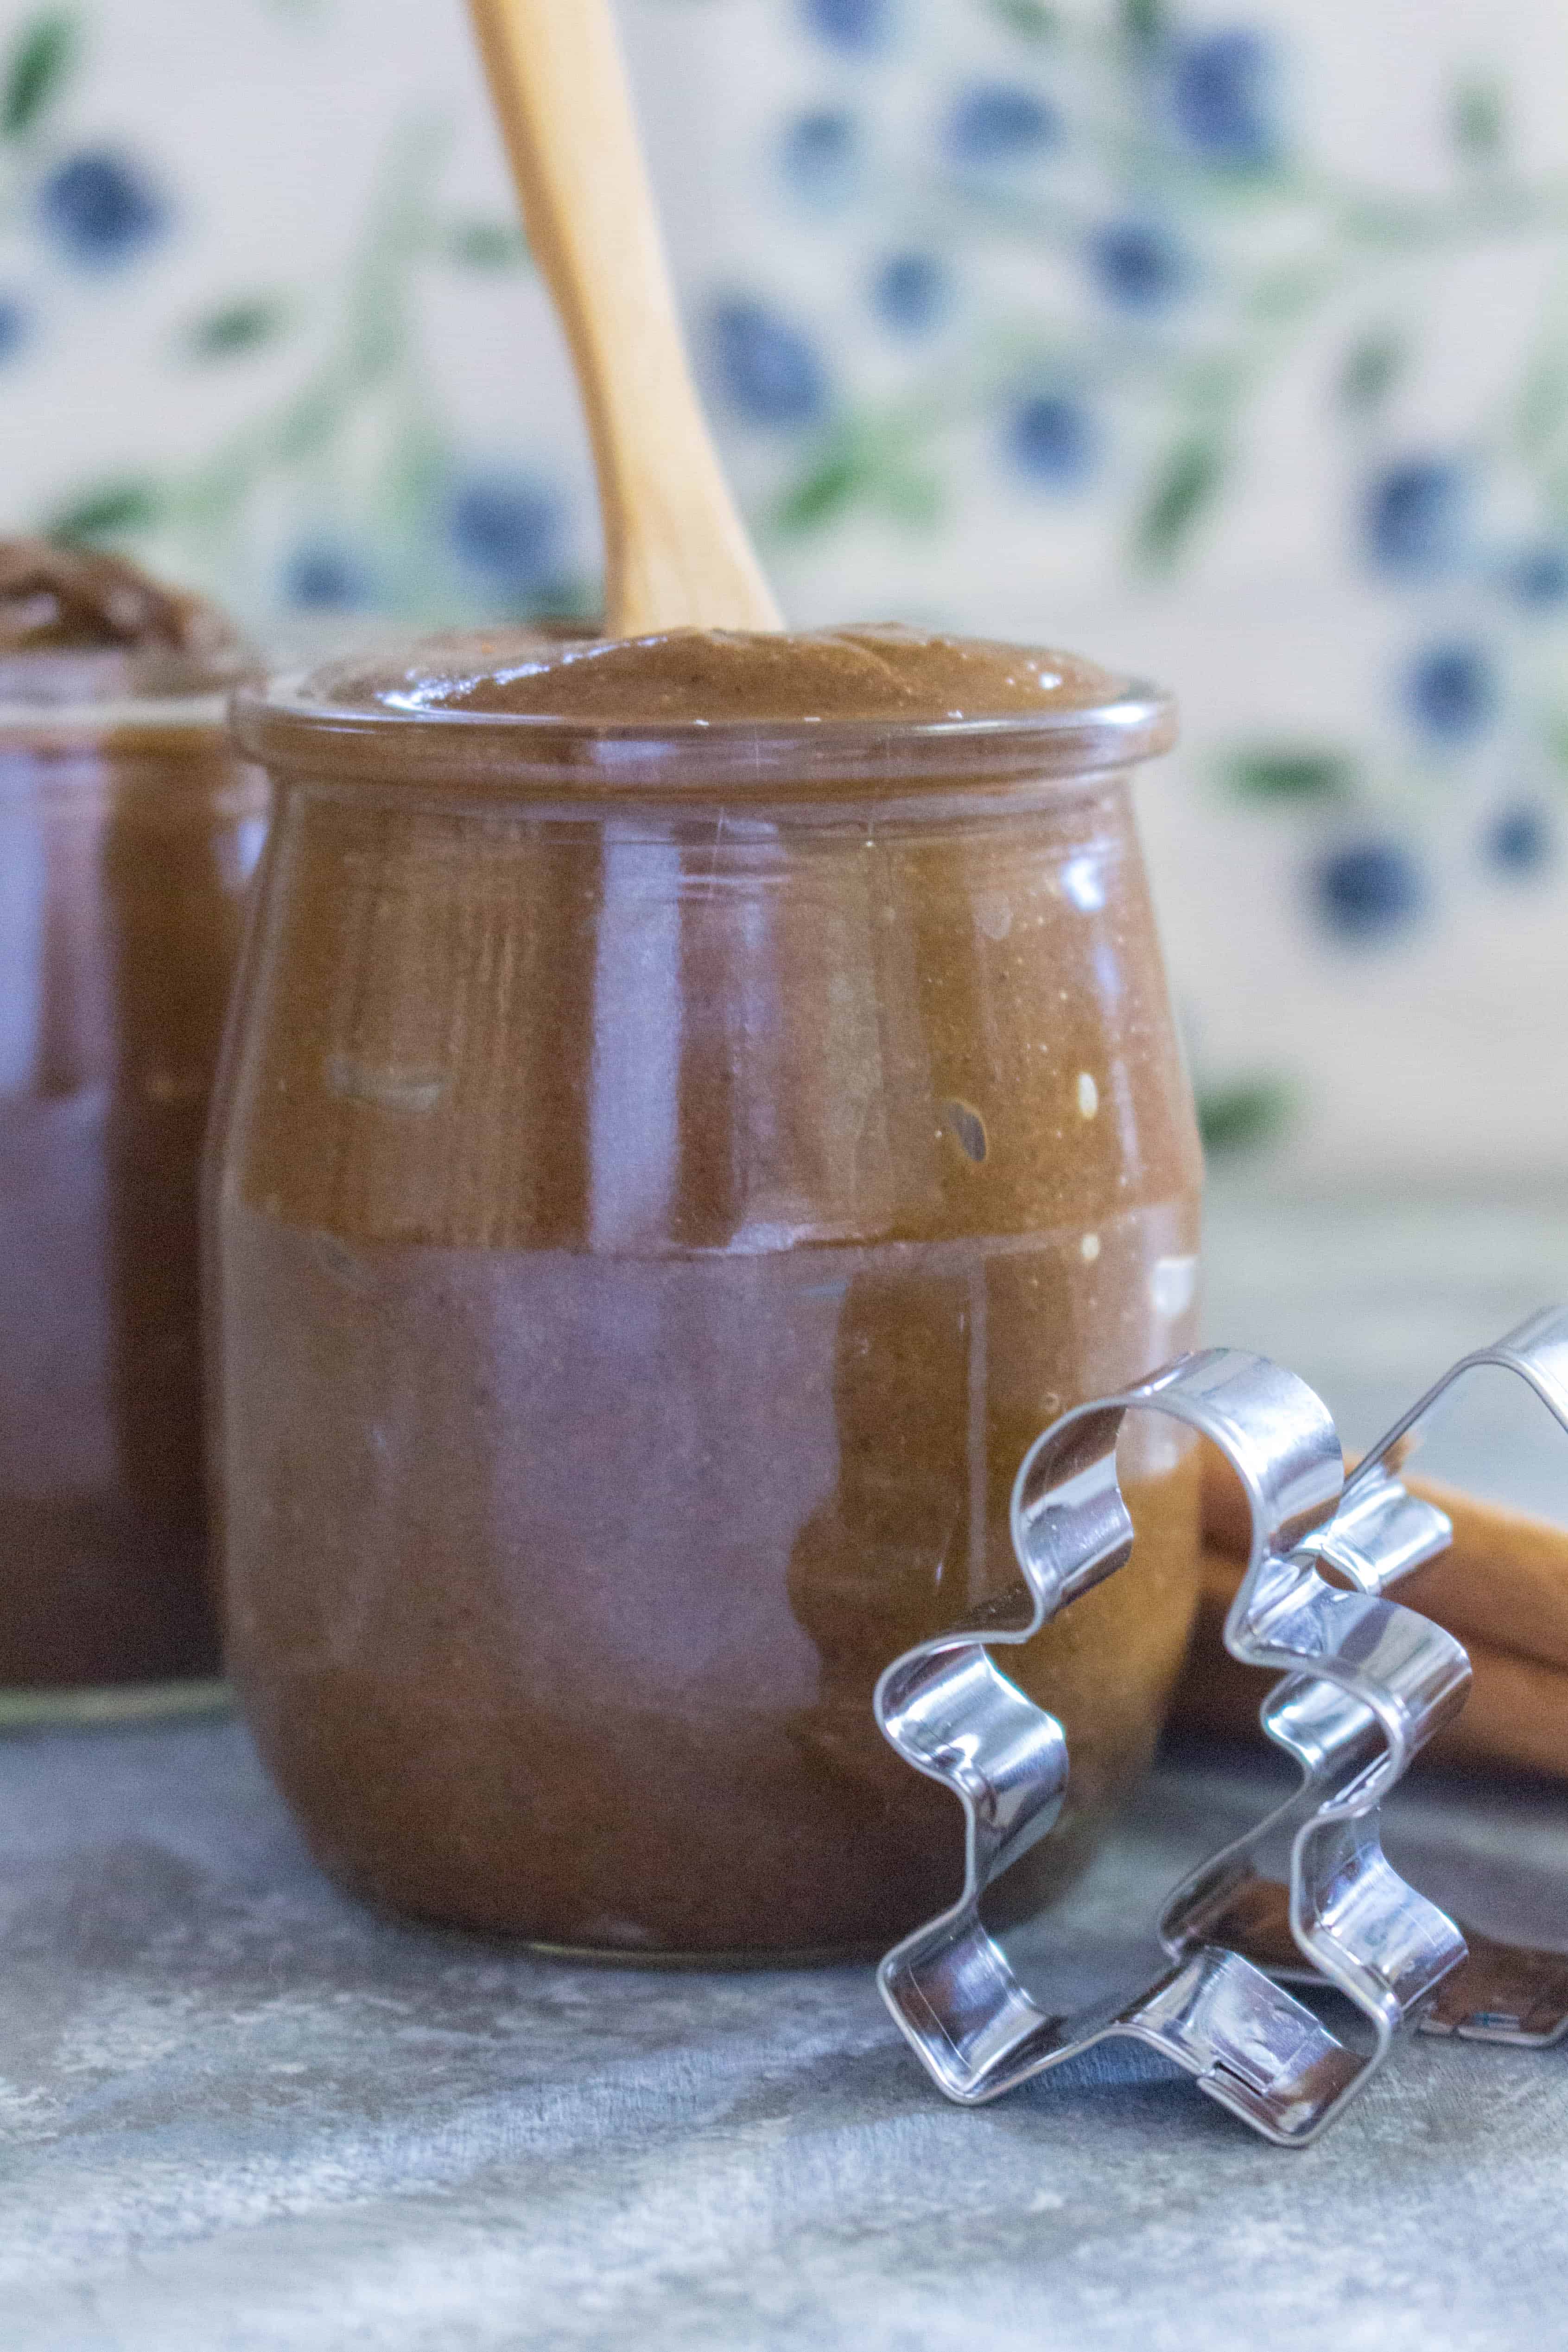 This homemade Gingerbread Nut Butter is smooth and creamy, with the perfect blend of spices to make you think you're about to eat a gingerbread cookie!